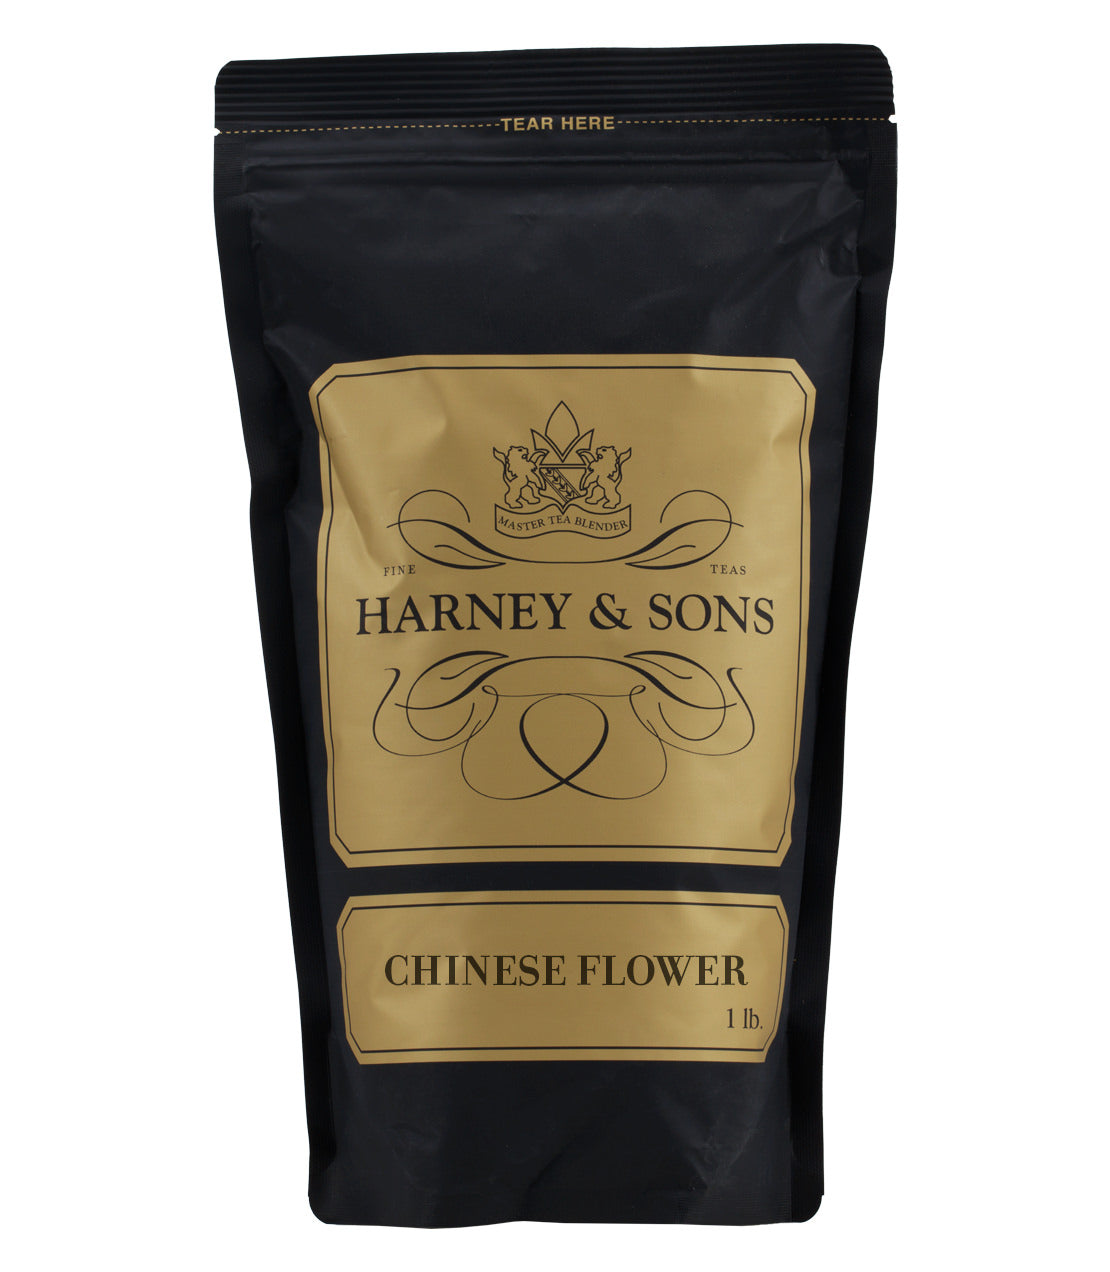 Chinese Flower - Loose 1 lb. Bag - Harney & Sons Fine Teas